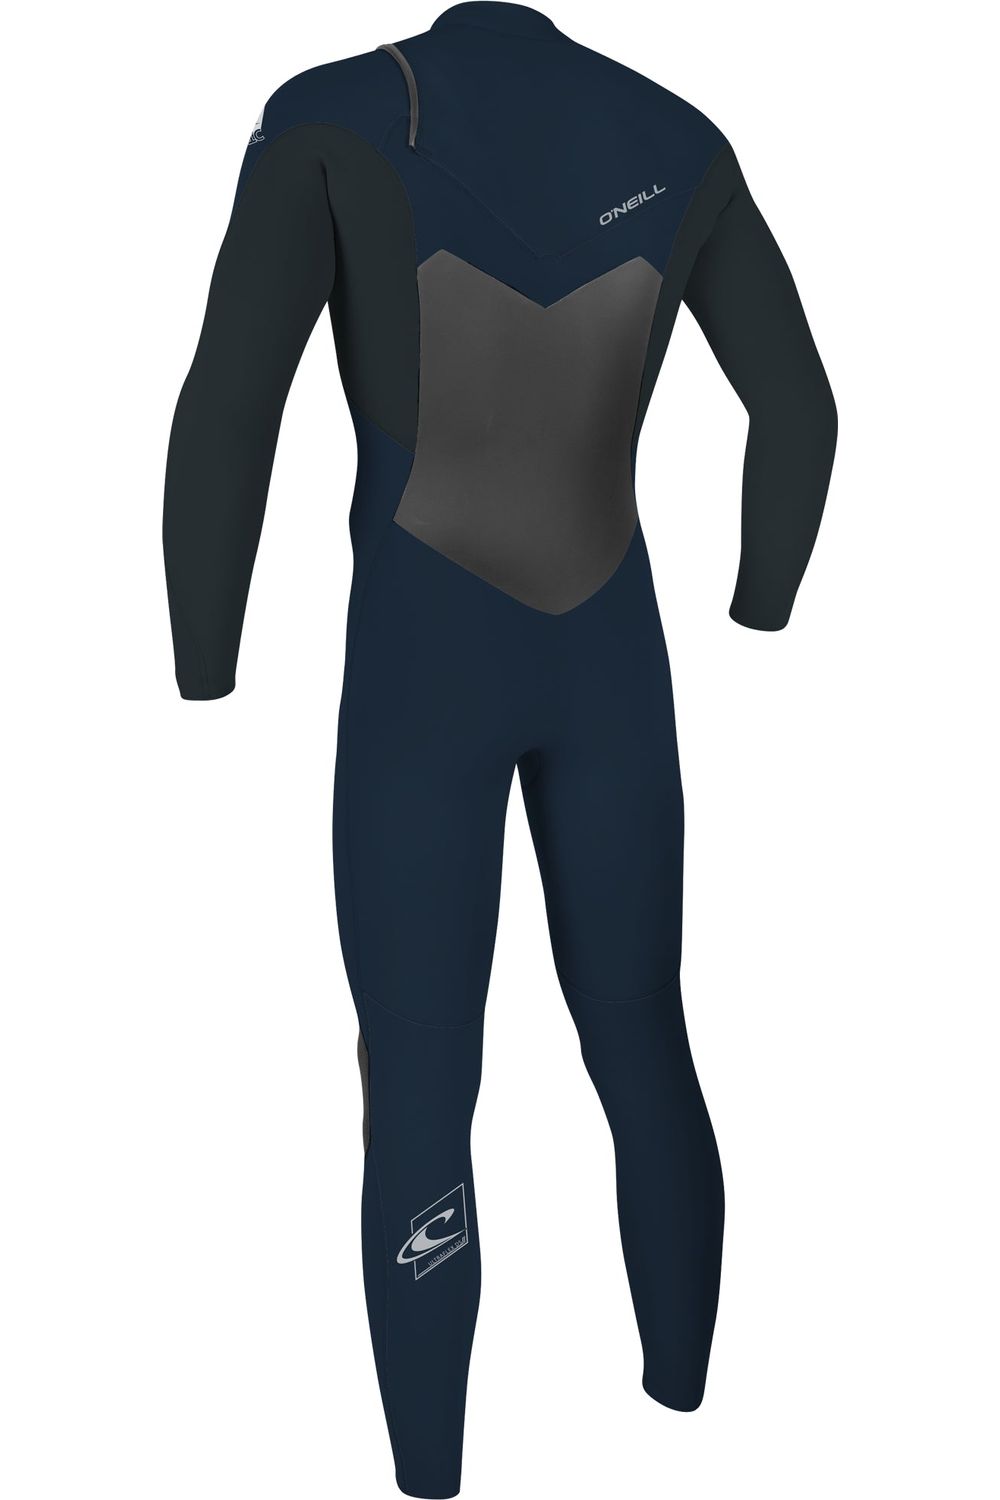 O'Neill Epic Wetsuit 5/4 Chest Zip Full Abyss Gunmetal